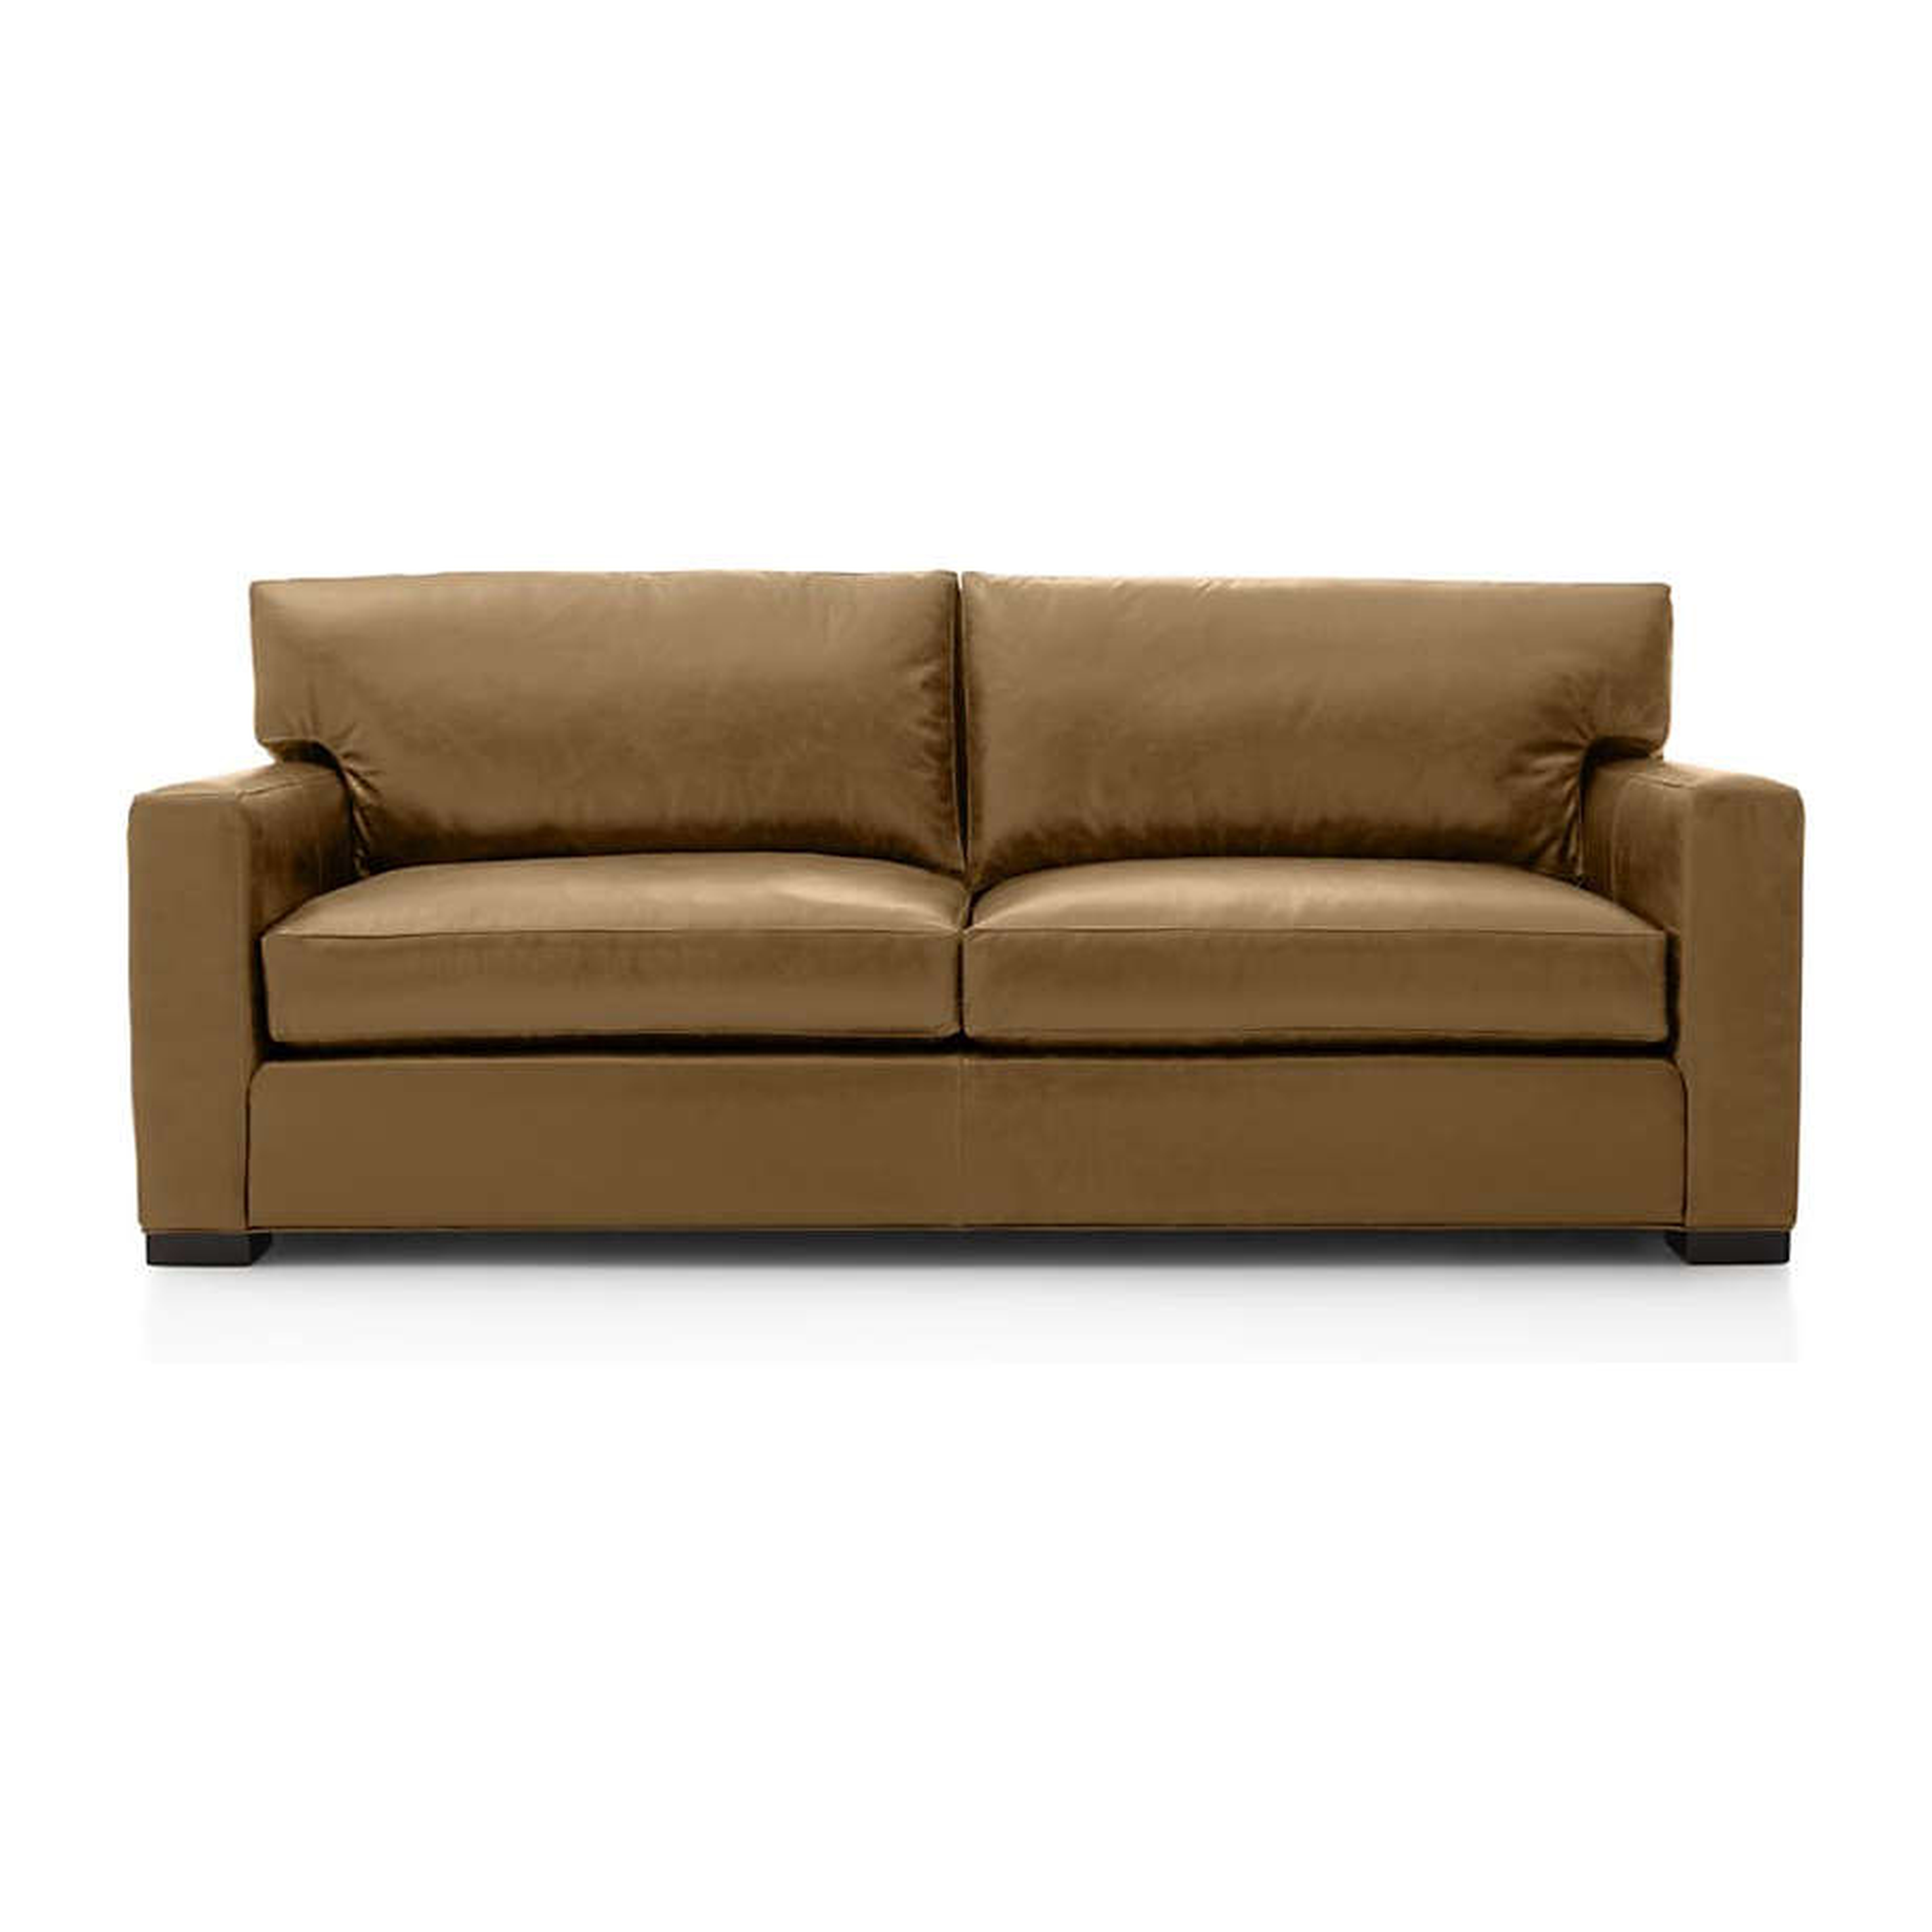 Axis II Leather 2-Seat Sofa - Crate and Barrel